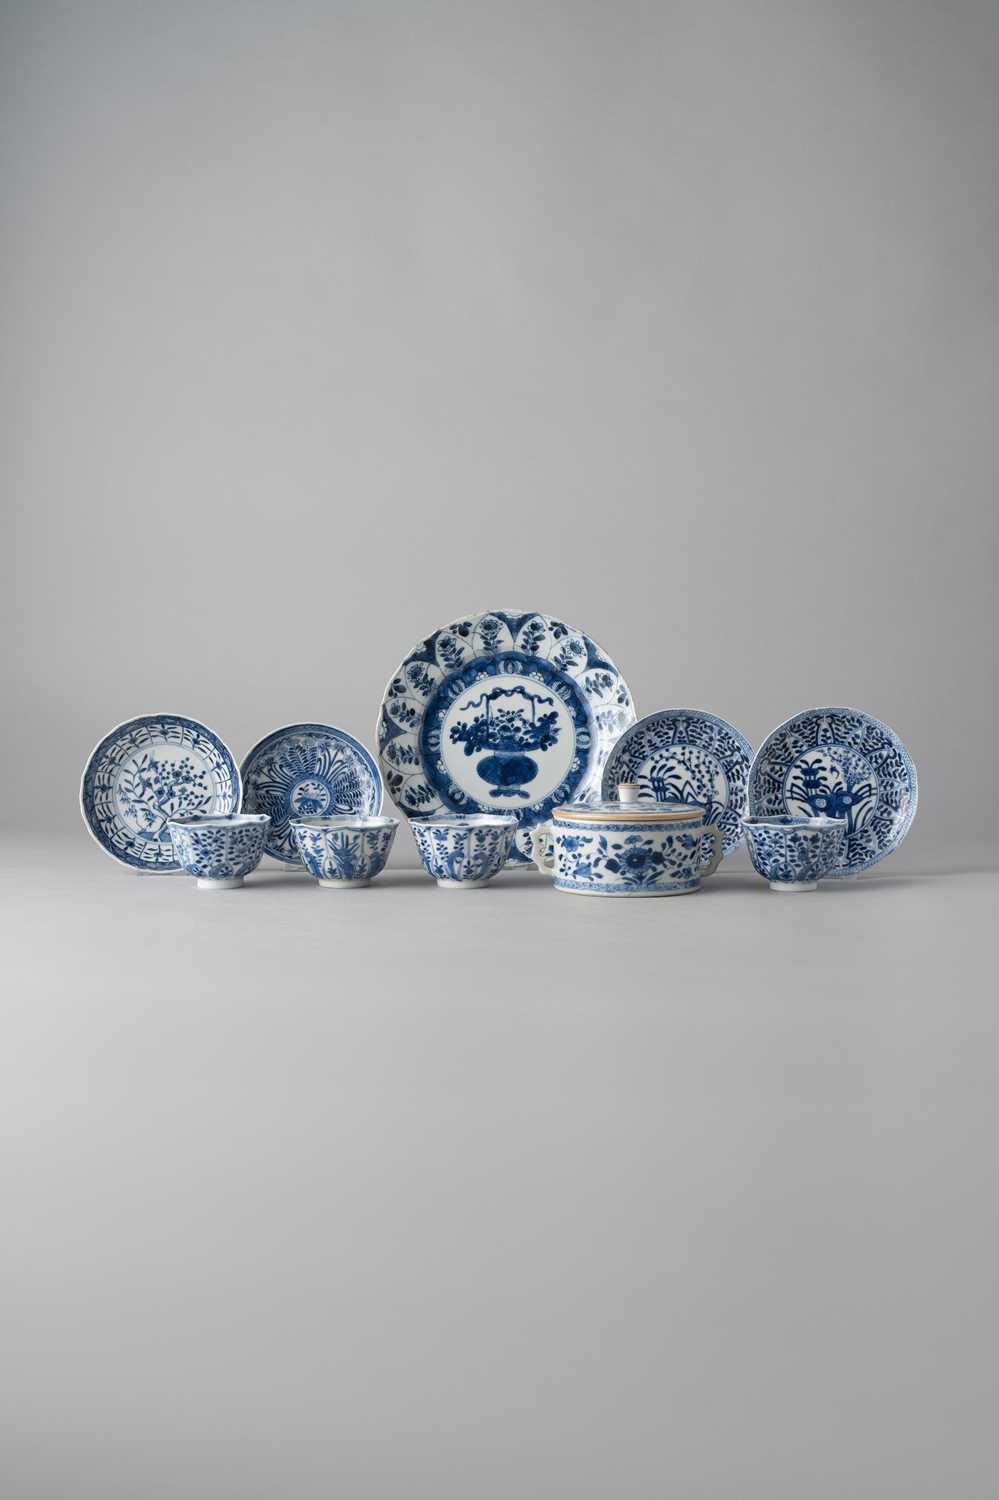 NO RESERVE A COLLECTION OF CHINESE BLUE AND WHITE ITEMS 18TH AND 19TH CENTURY Comprising: a dish